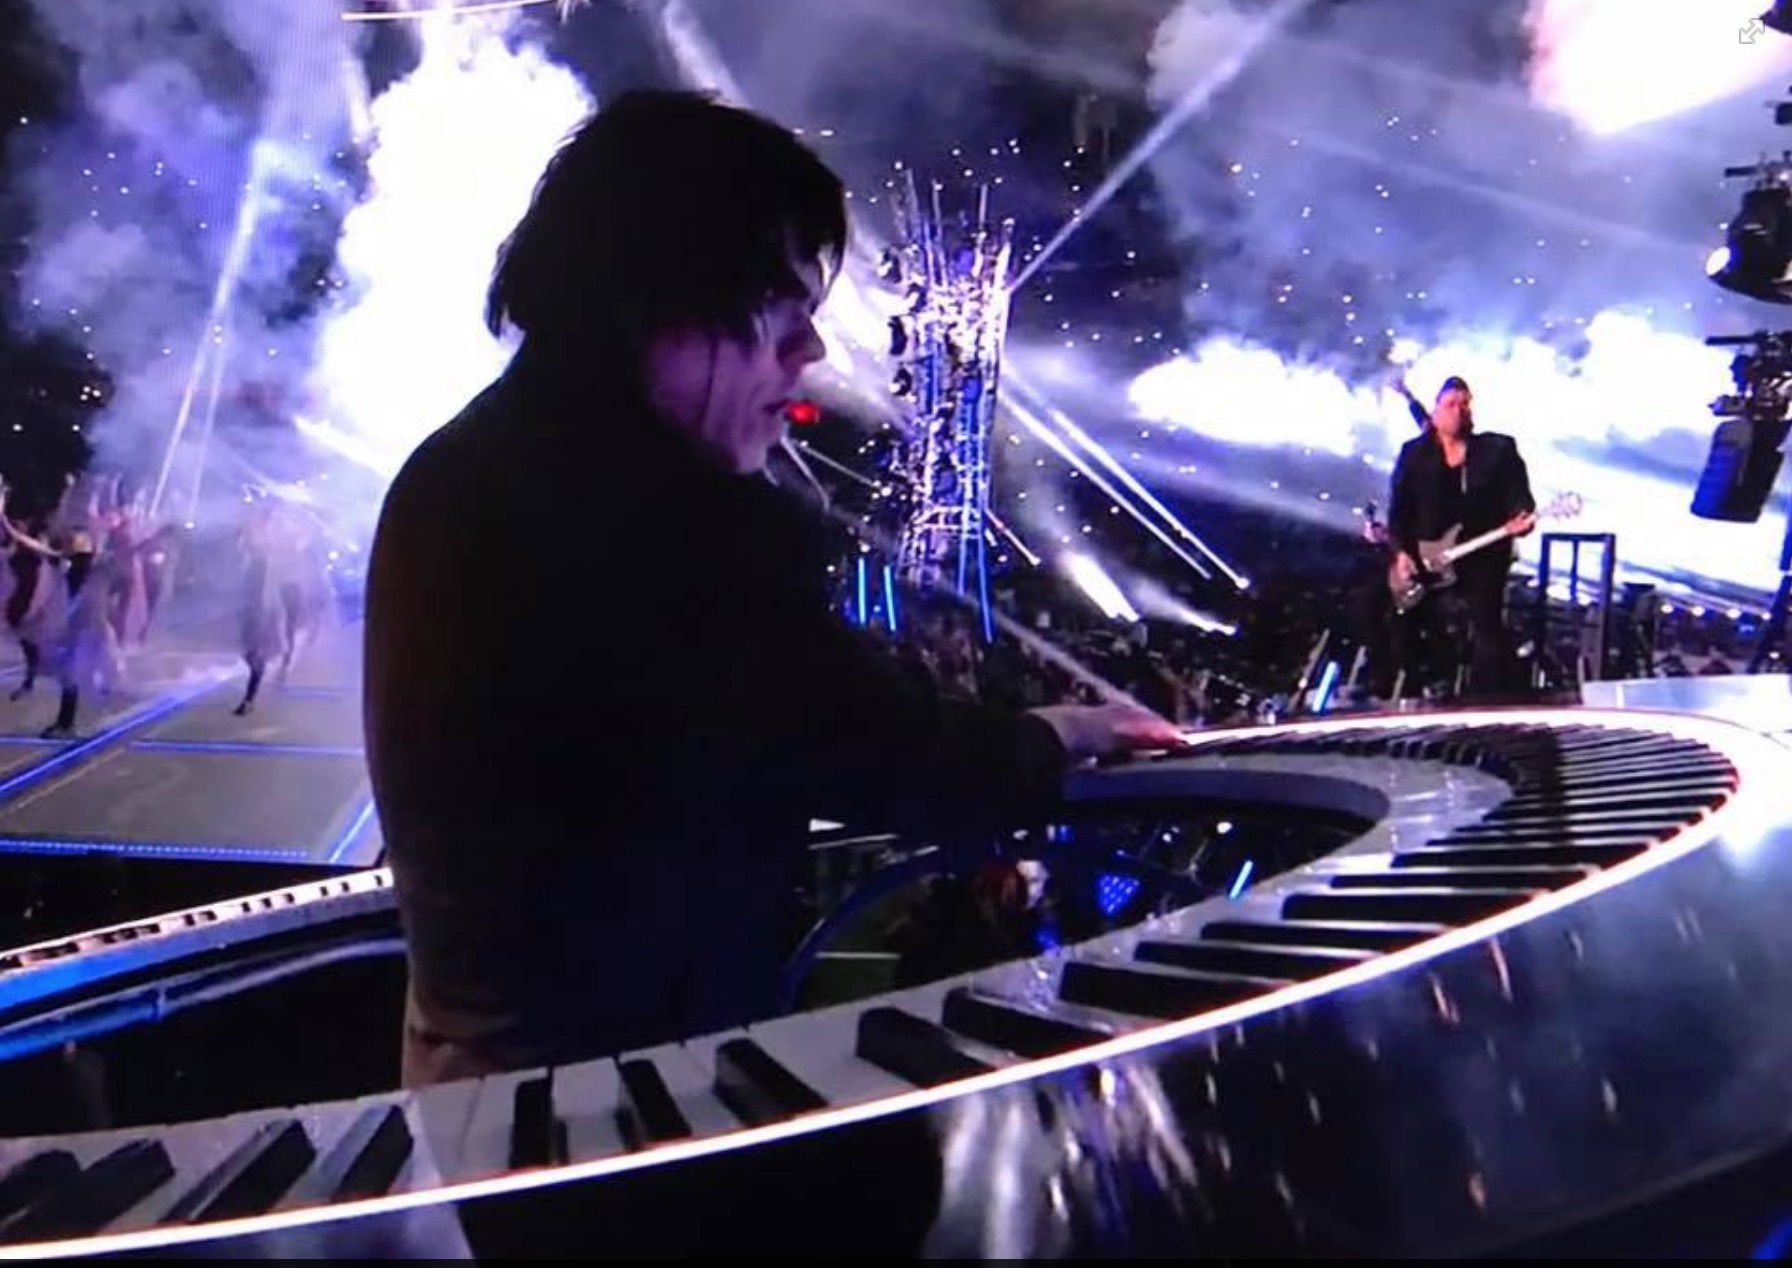 Woah – Did you see that? PianoArc at the Superbowl